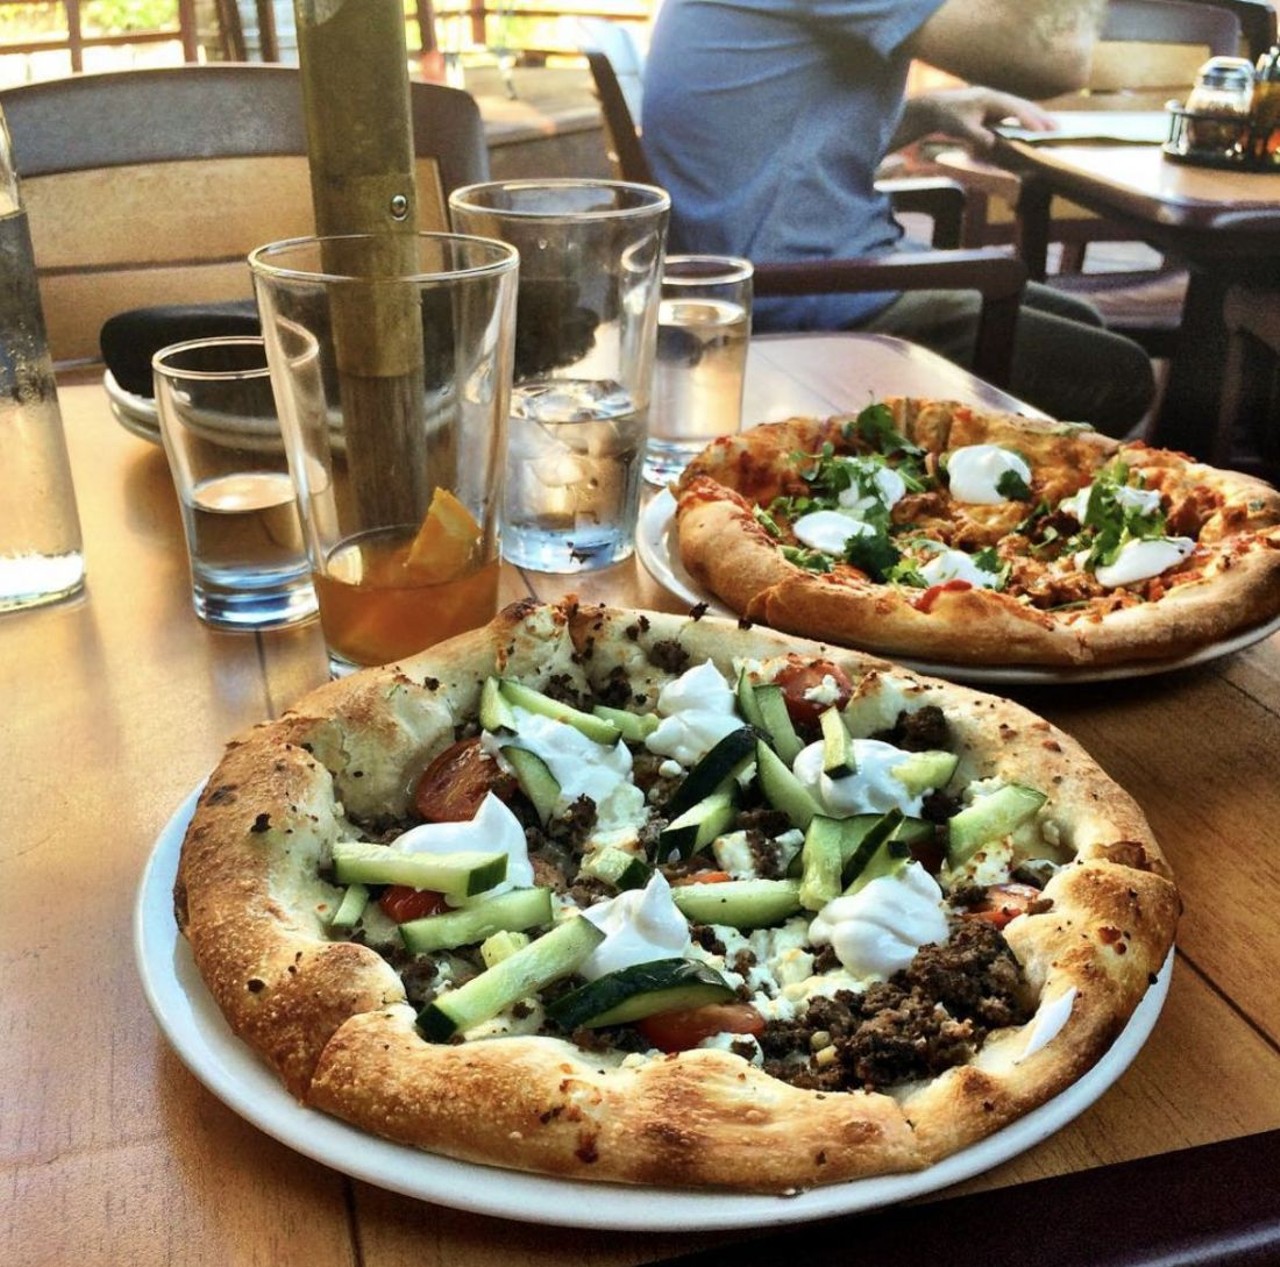 Motor City Brew Works
470 W Canfield St, Detroit, MI 48201
Take the kids out for a slice of pie from Motor City Brew Works brick oven pizza oven. From plain cheese to lamb and mint, this place will work for any kid whether they&#146;re picky or flexible.
Photo courtesy of @d_reils